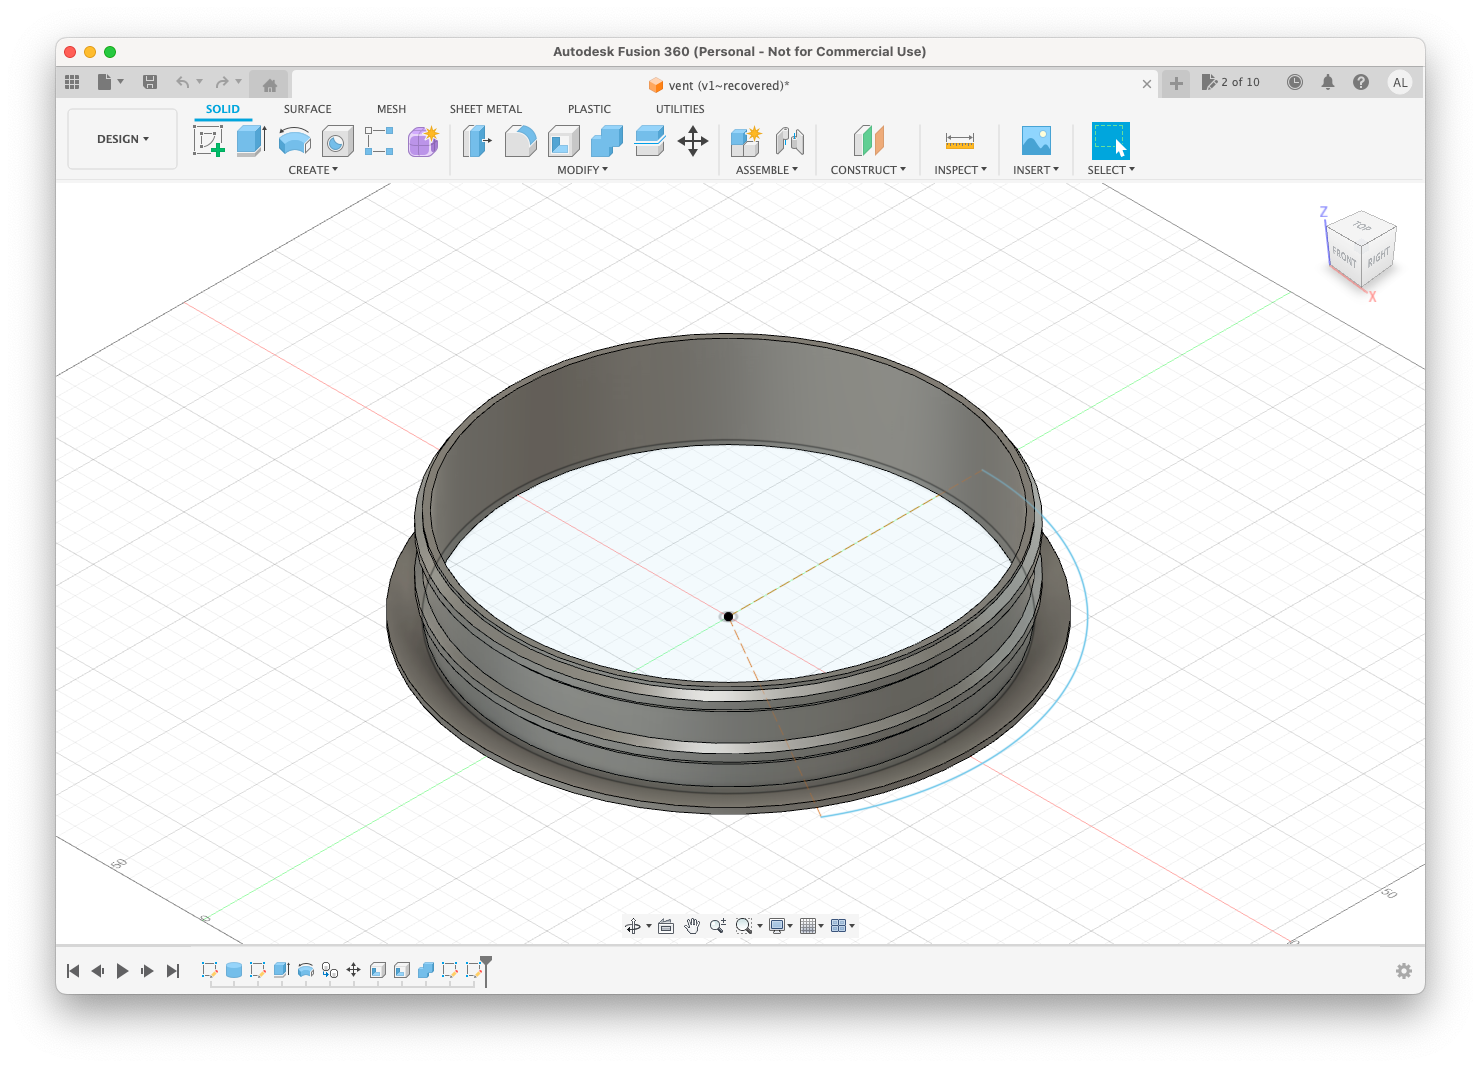 A screenshot of Autodesk Fusion 360, showing a duct ring in a 3/4 view.